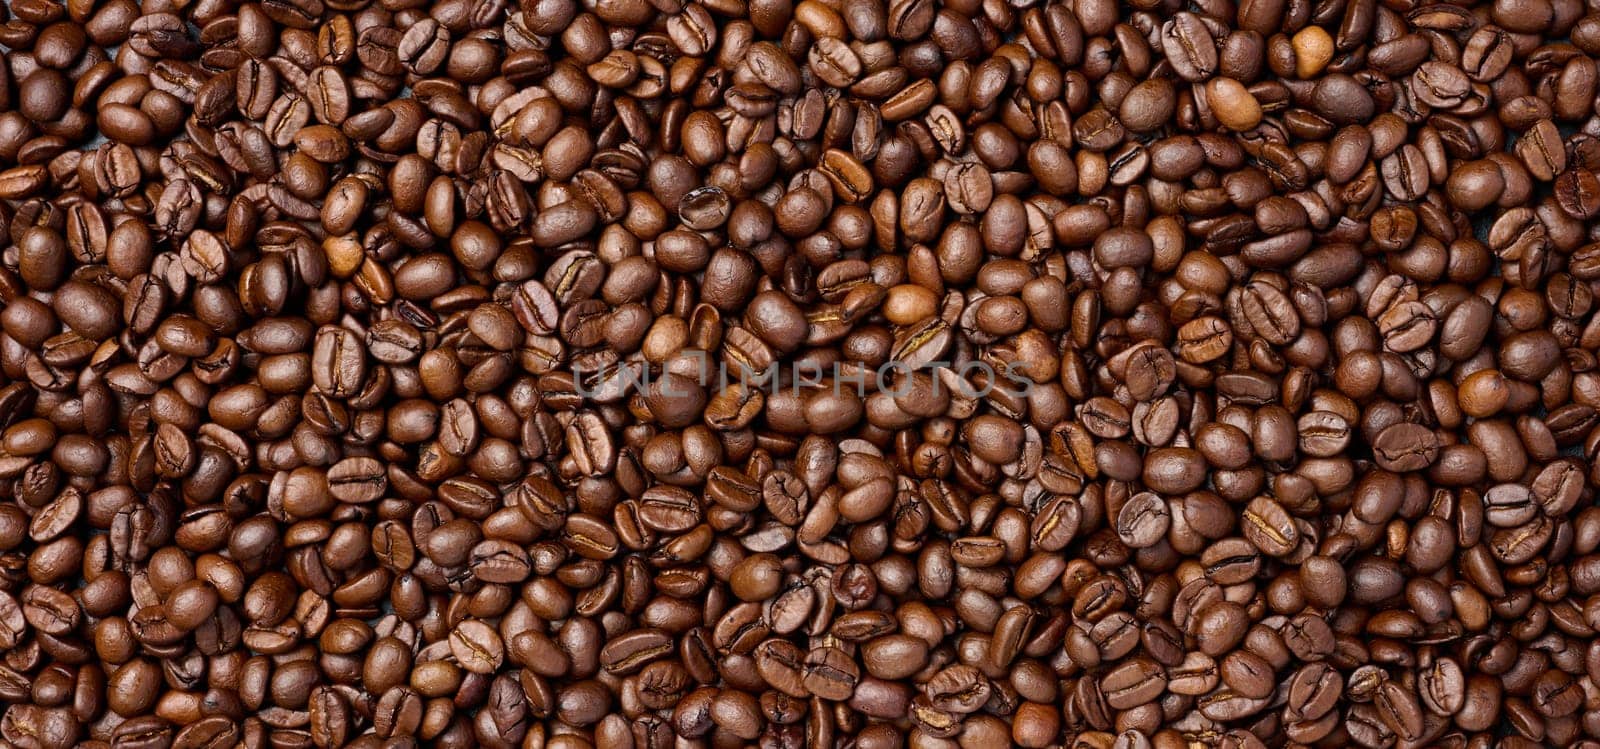 Scattered roasted coffee beans, full frame by ndanko